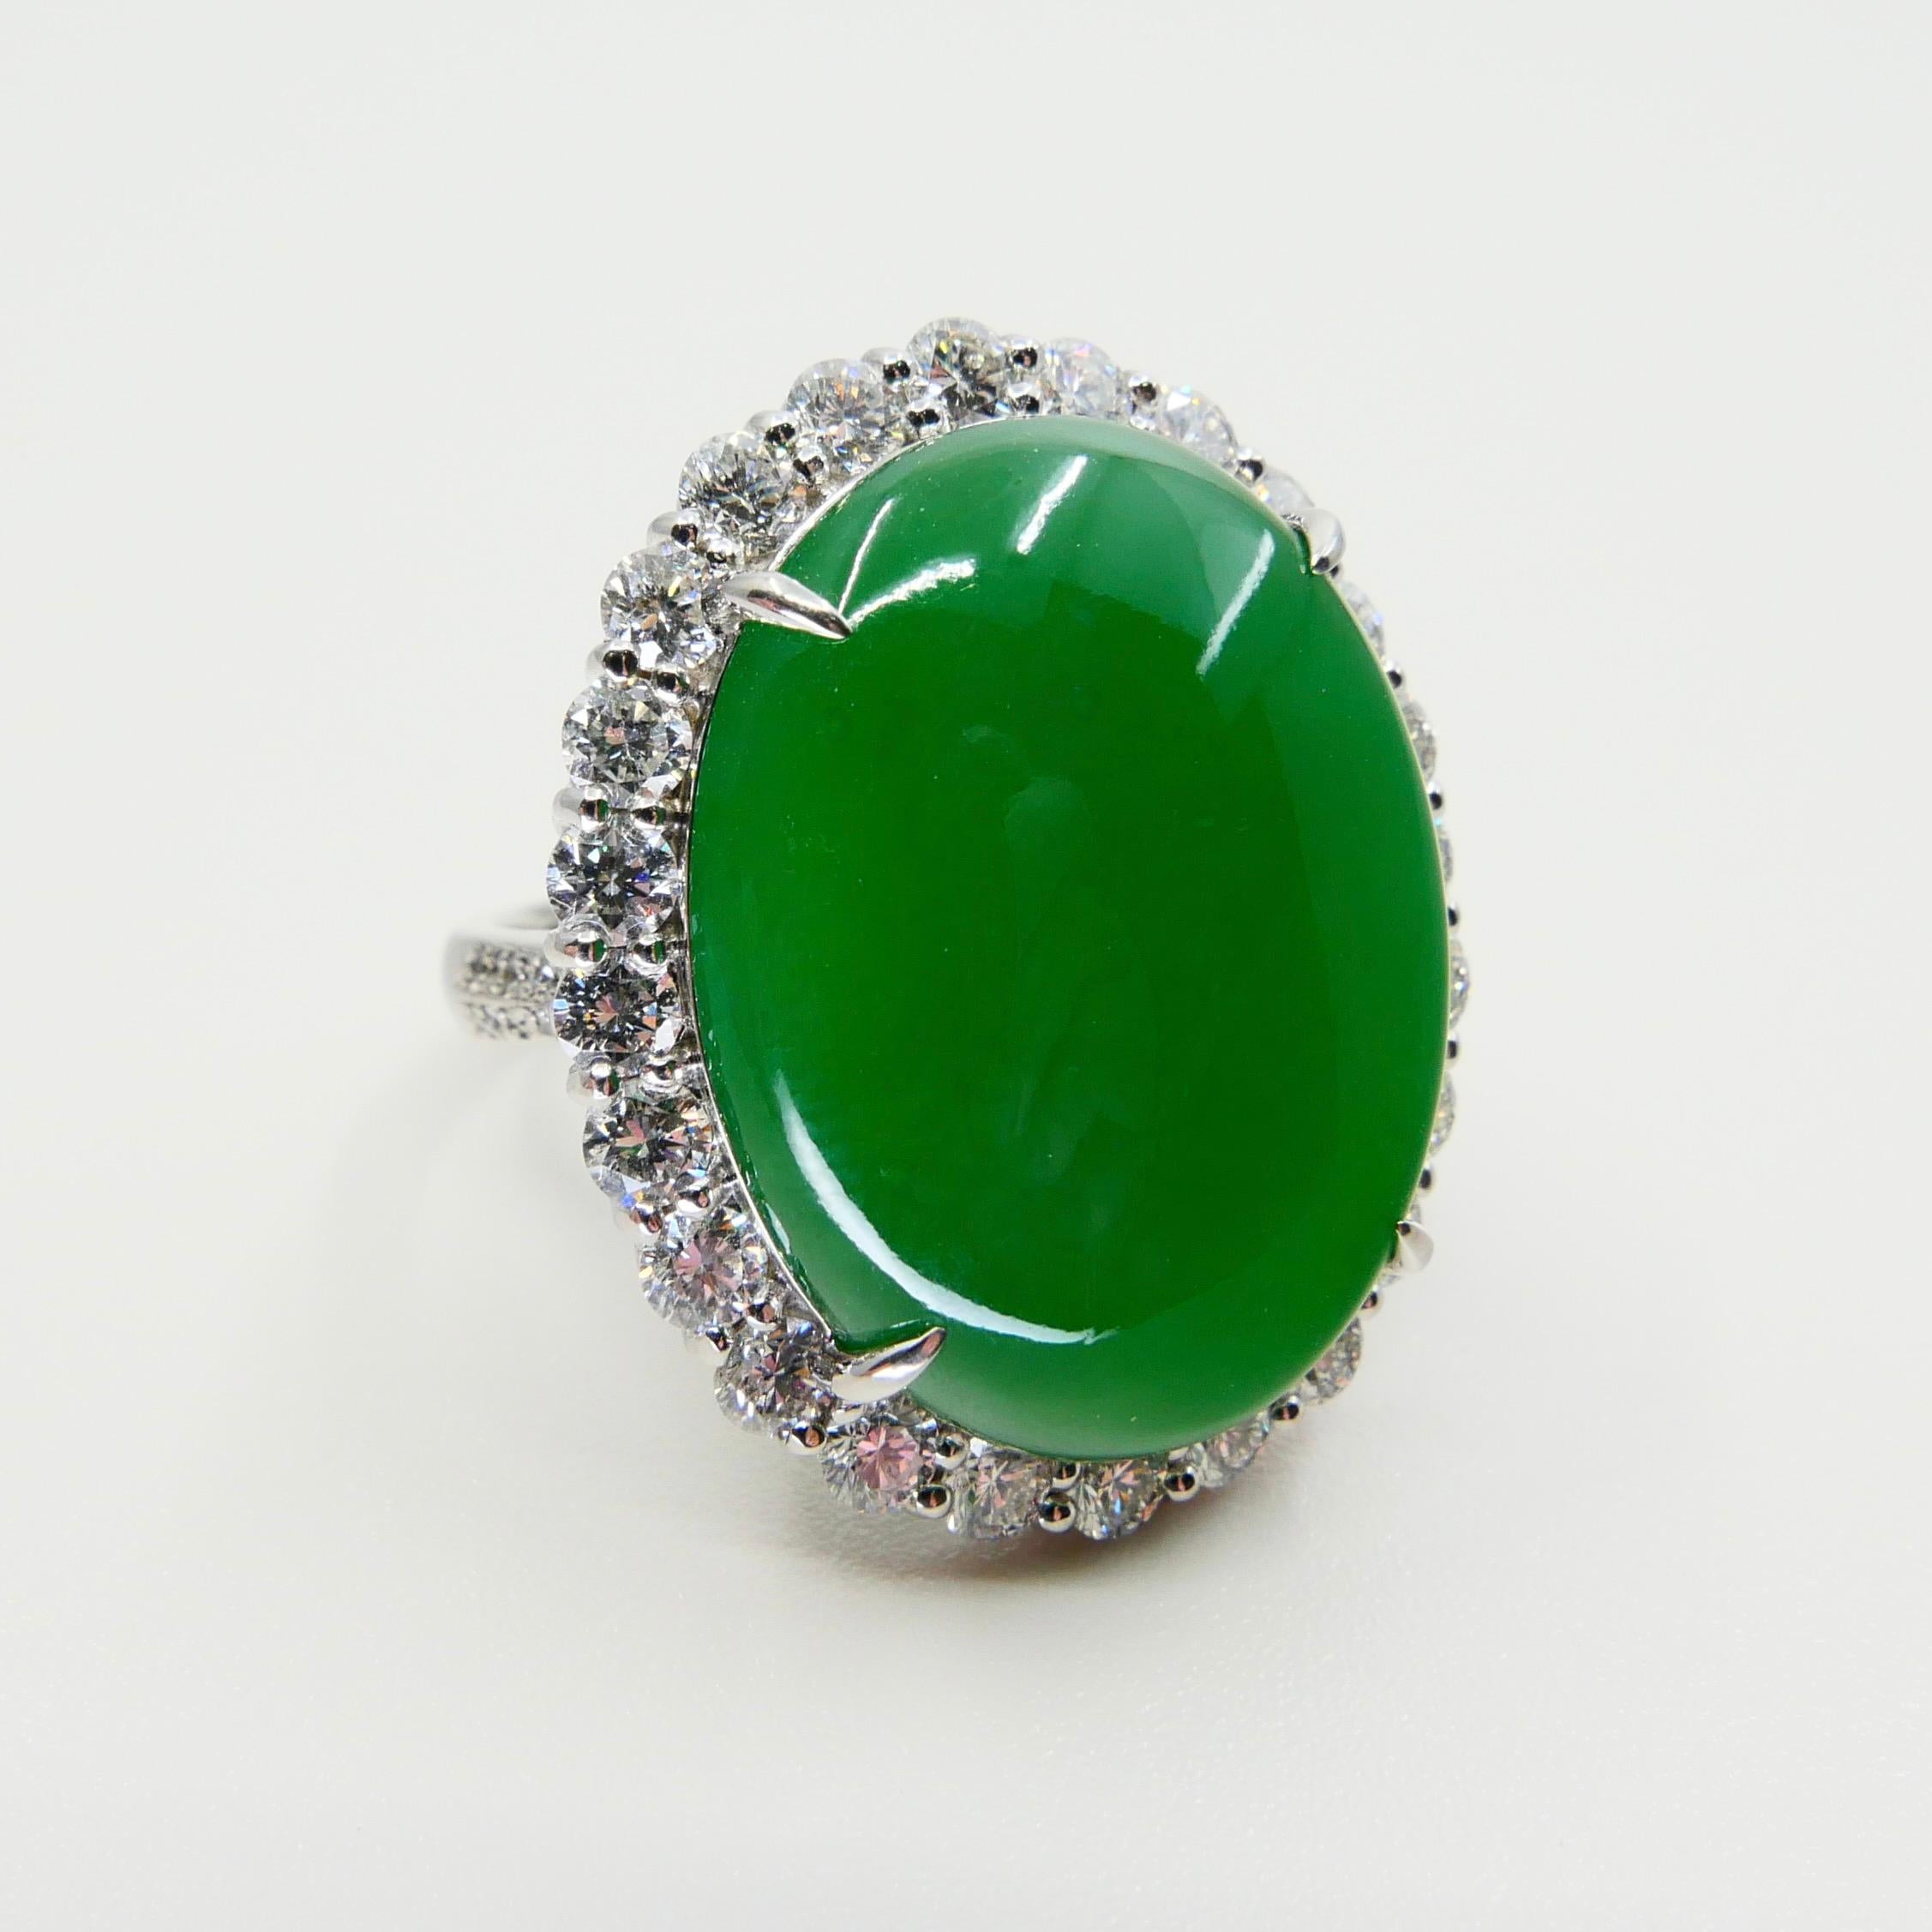 Certified 21 Cts Jade & Diamond Cocktail Ring, Intense Apple Green, Massive 3